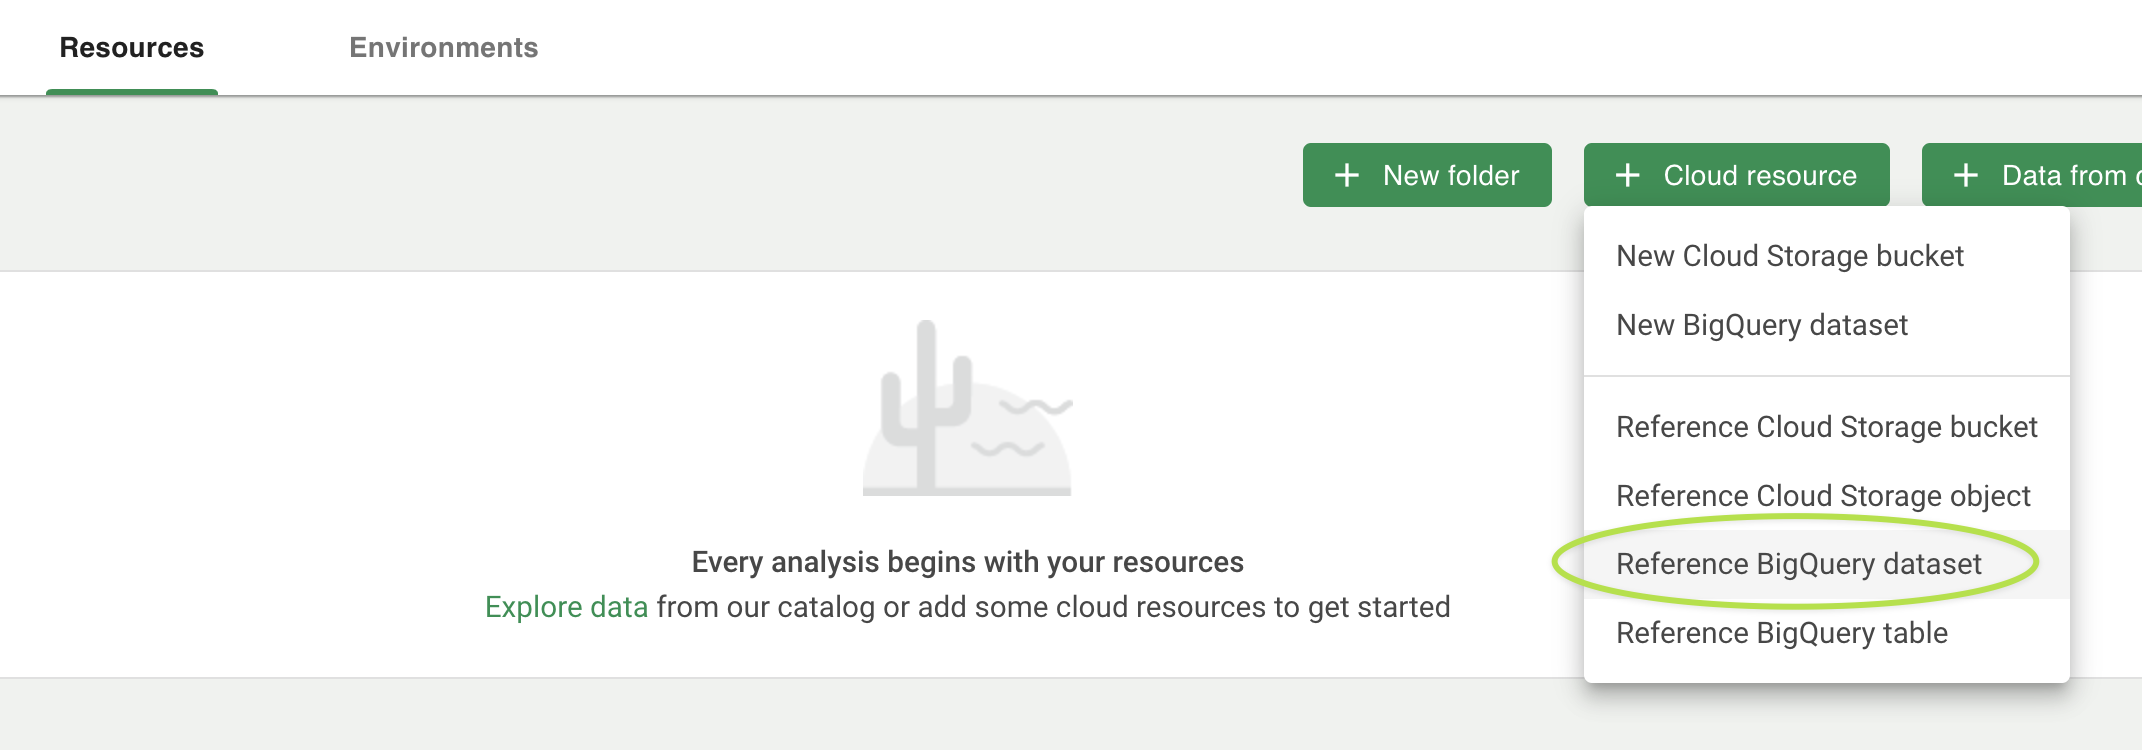 Screenshot of Resources page, highlighting 'Reference BigQuery dataset' option under '+ Cloud resource' button.